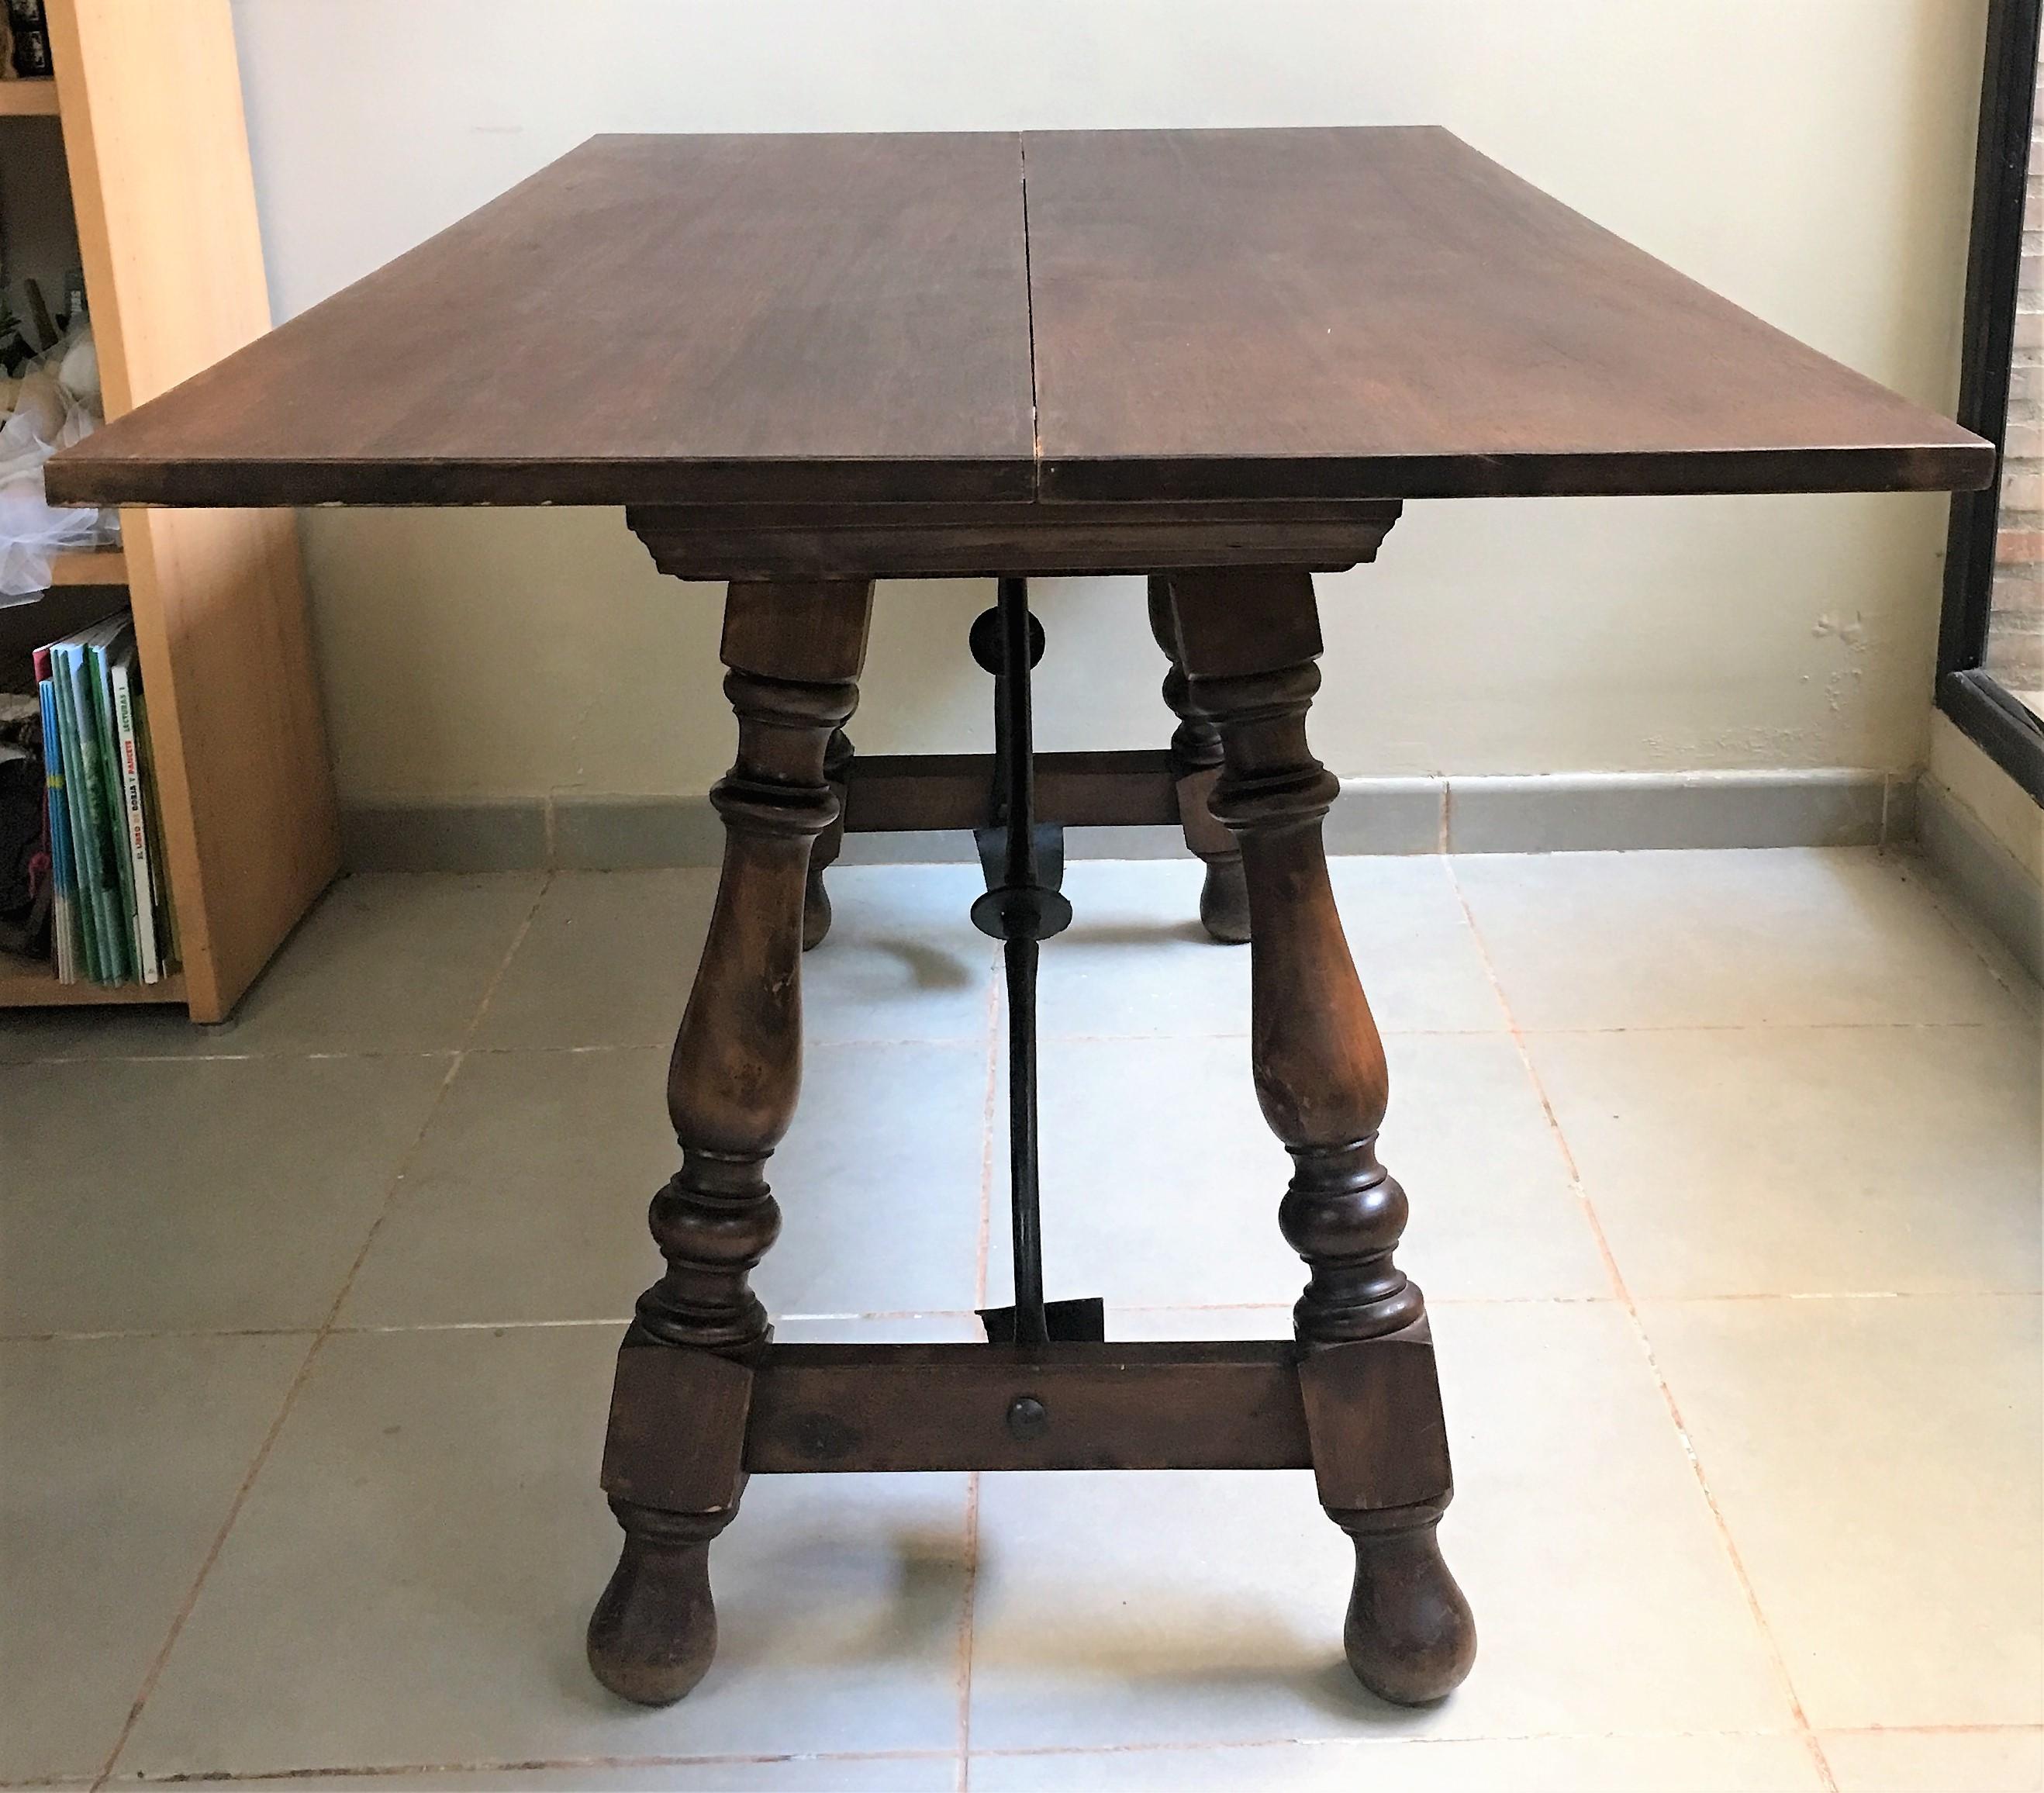 20th century Spanish console fold out farm table
Works as both a dining table and console.
Measures: 15.5